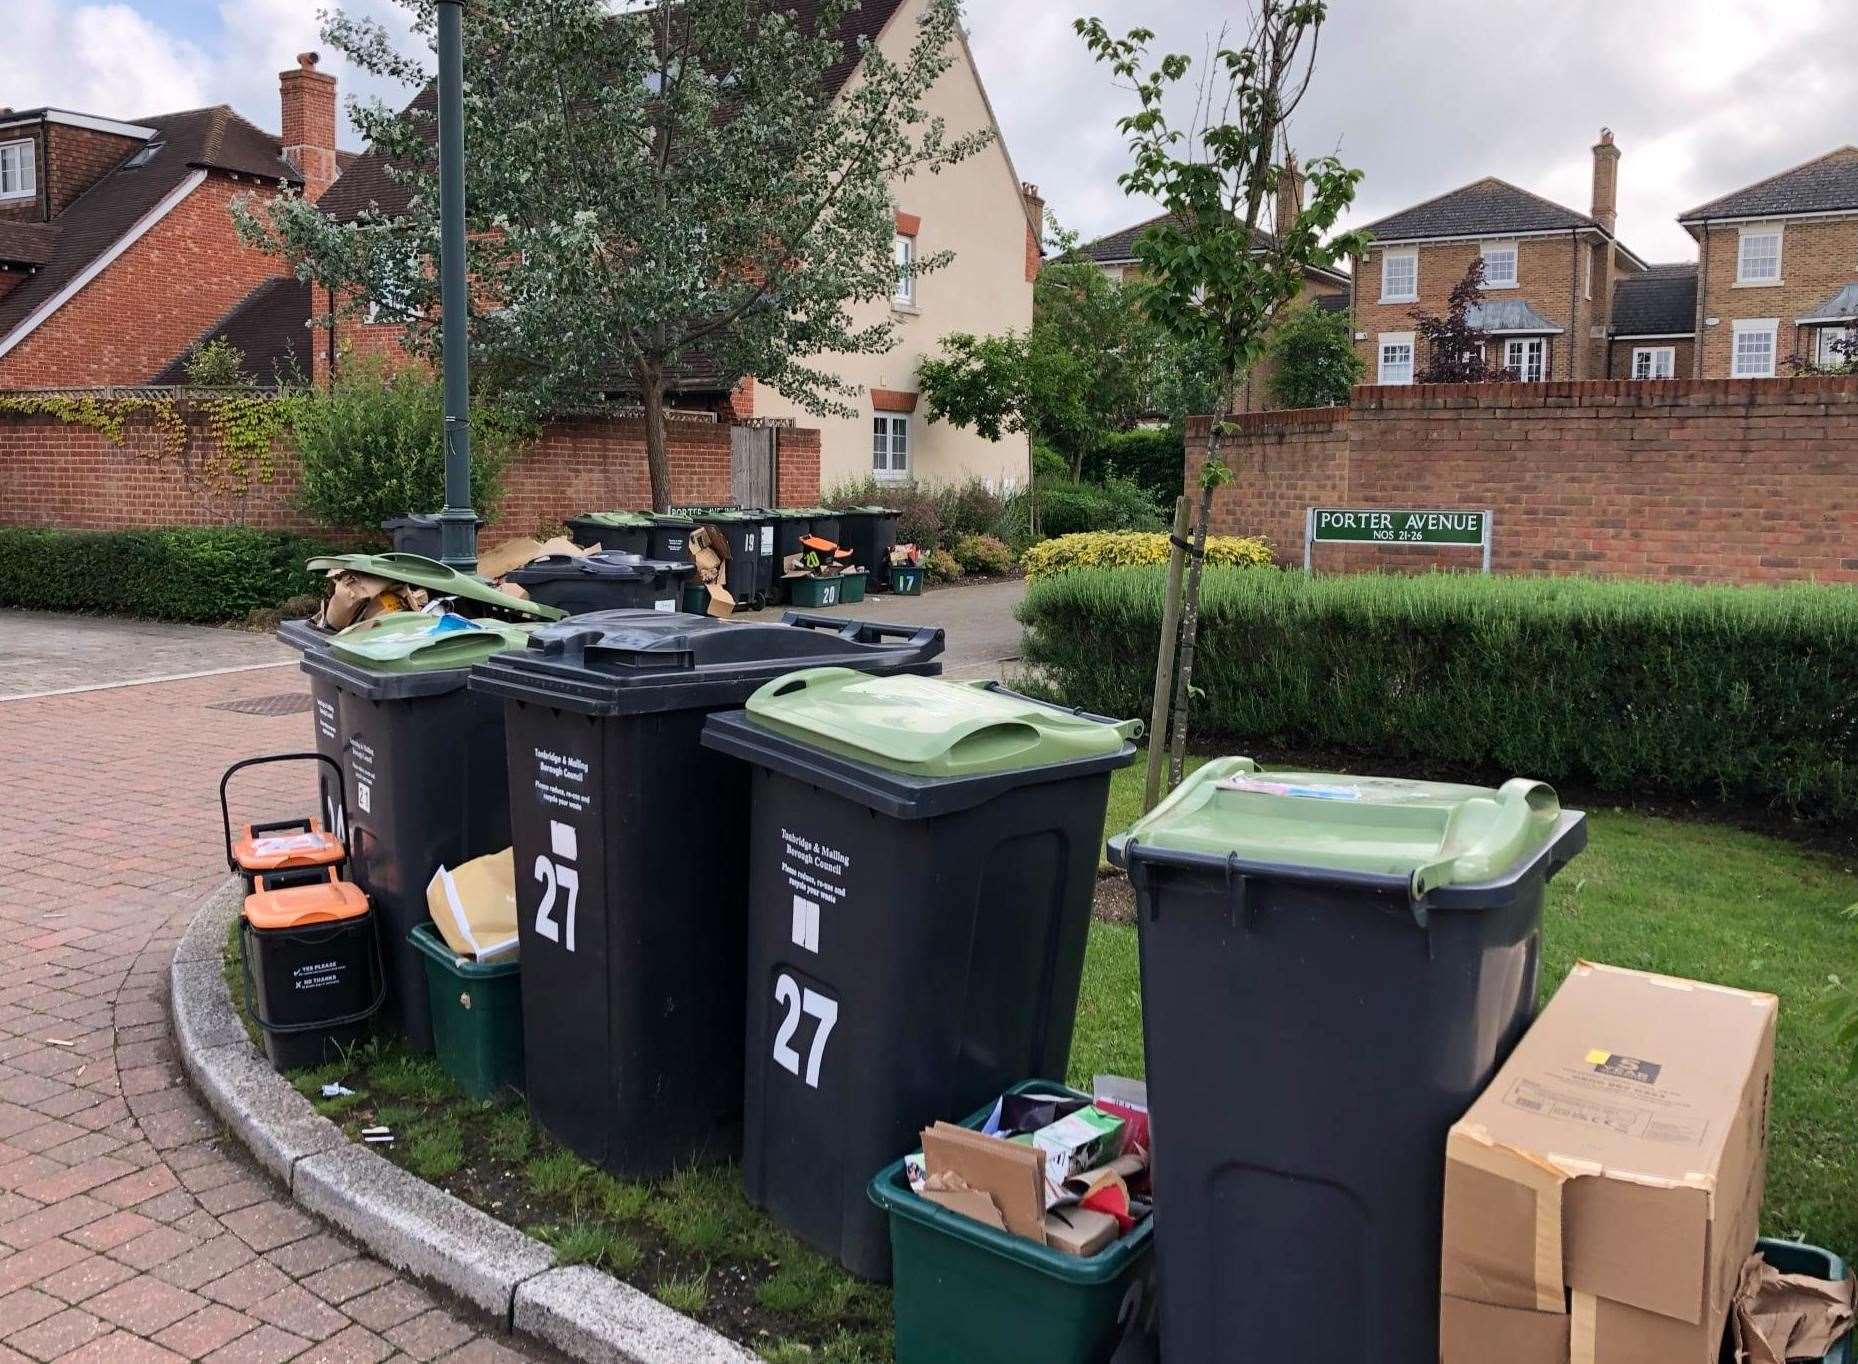 The recycling bins in Porter Avenue in Tonbridge and Malling are overflowing as a result of the suspended collections